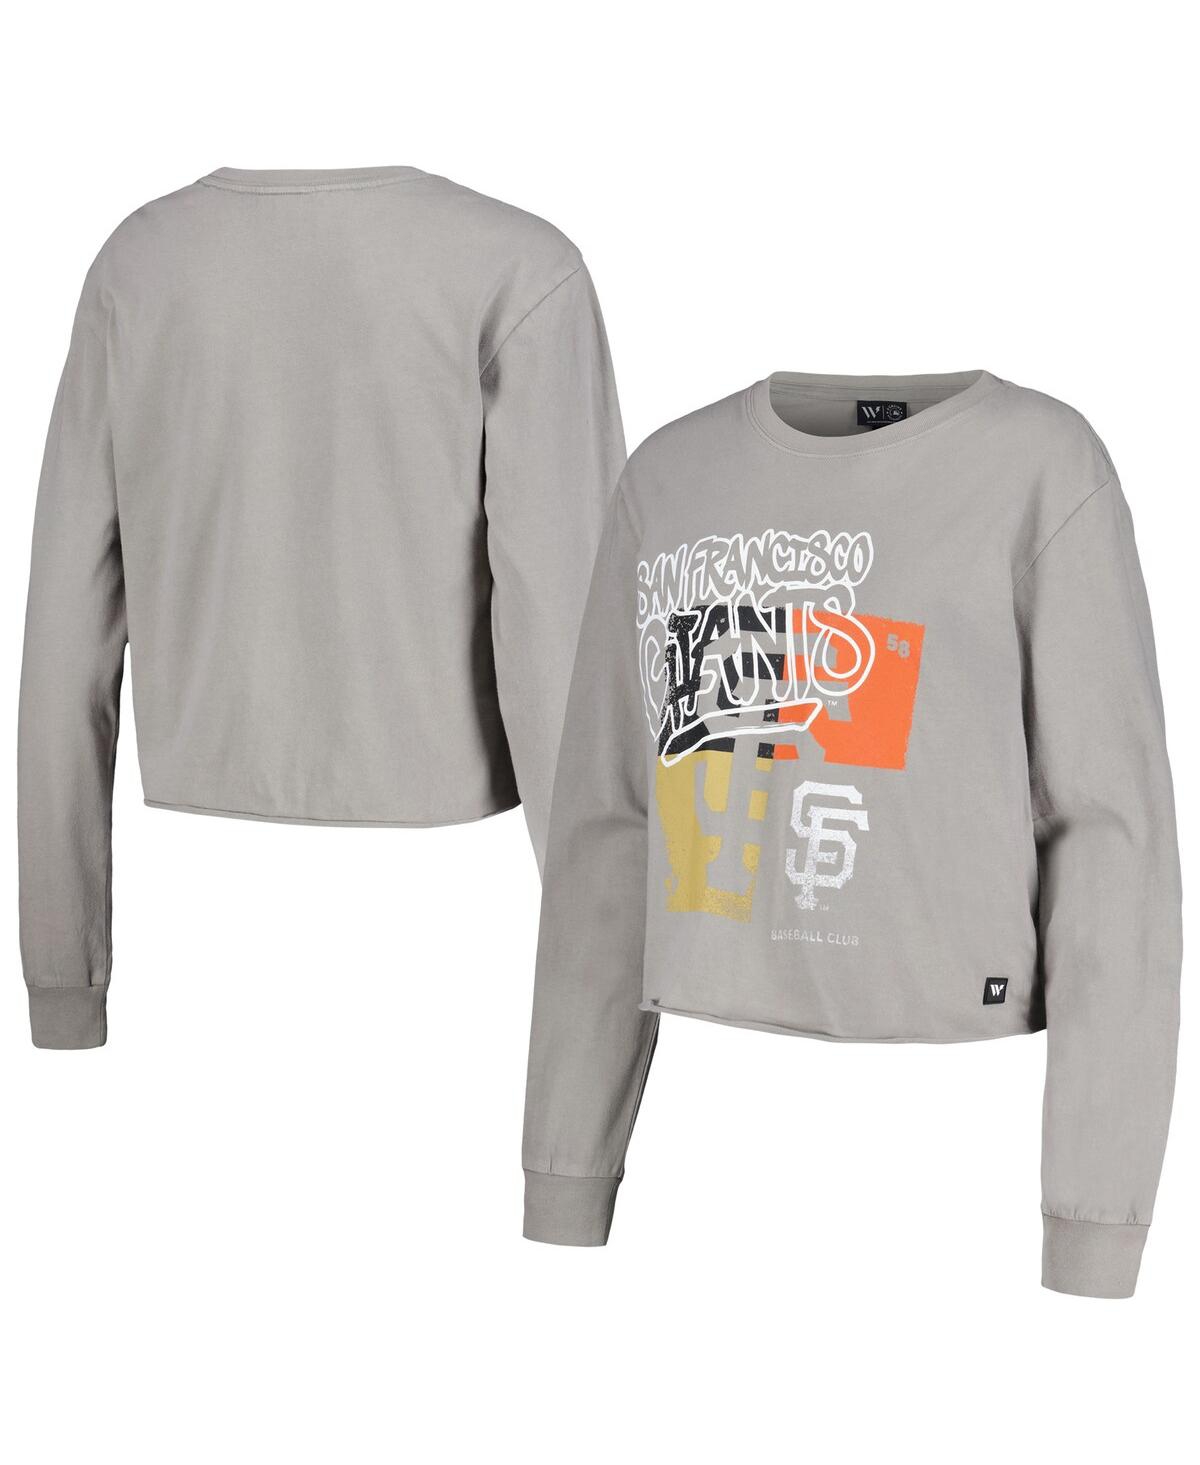 Women's The Wild Collective Gray San Francisco Giants Cropped Long Sleeve T-shirt - Gray